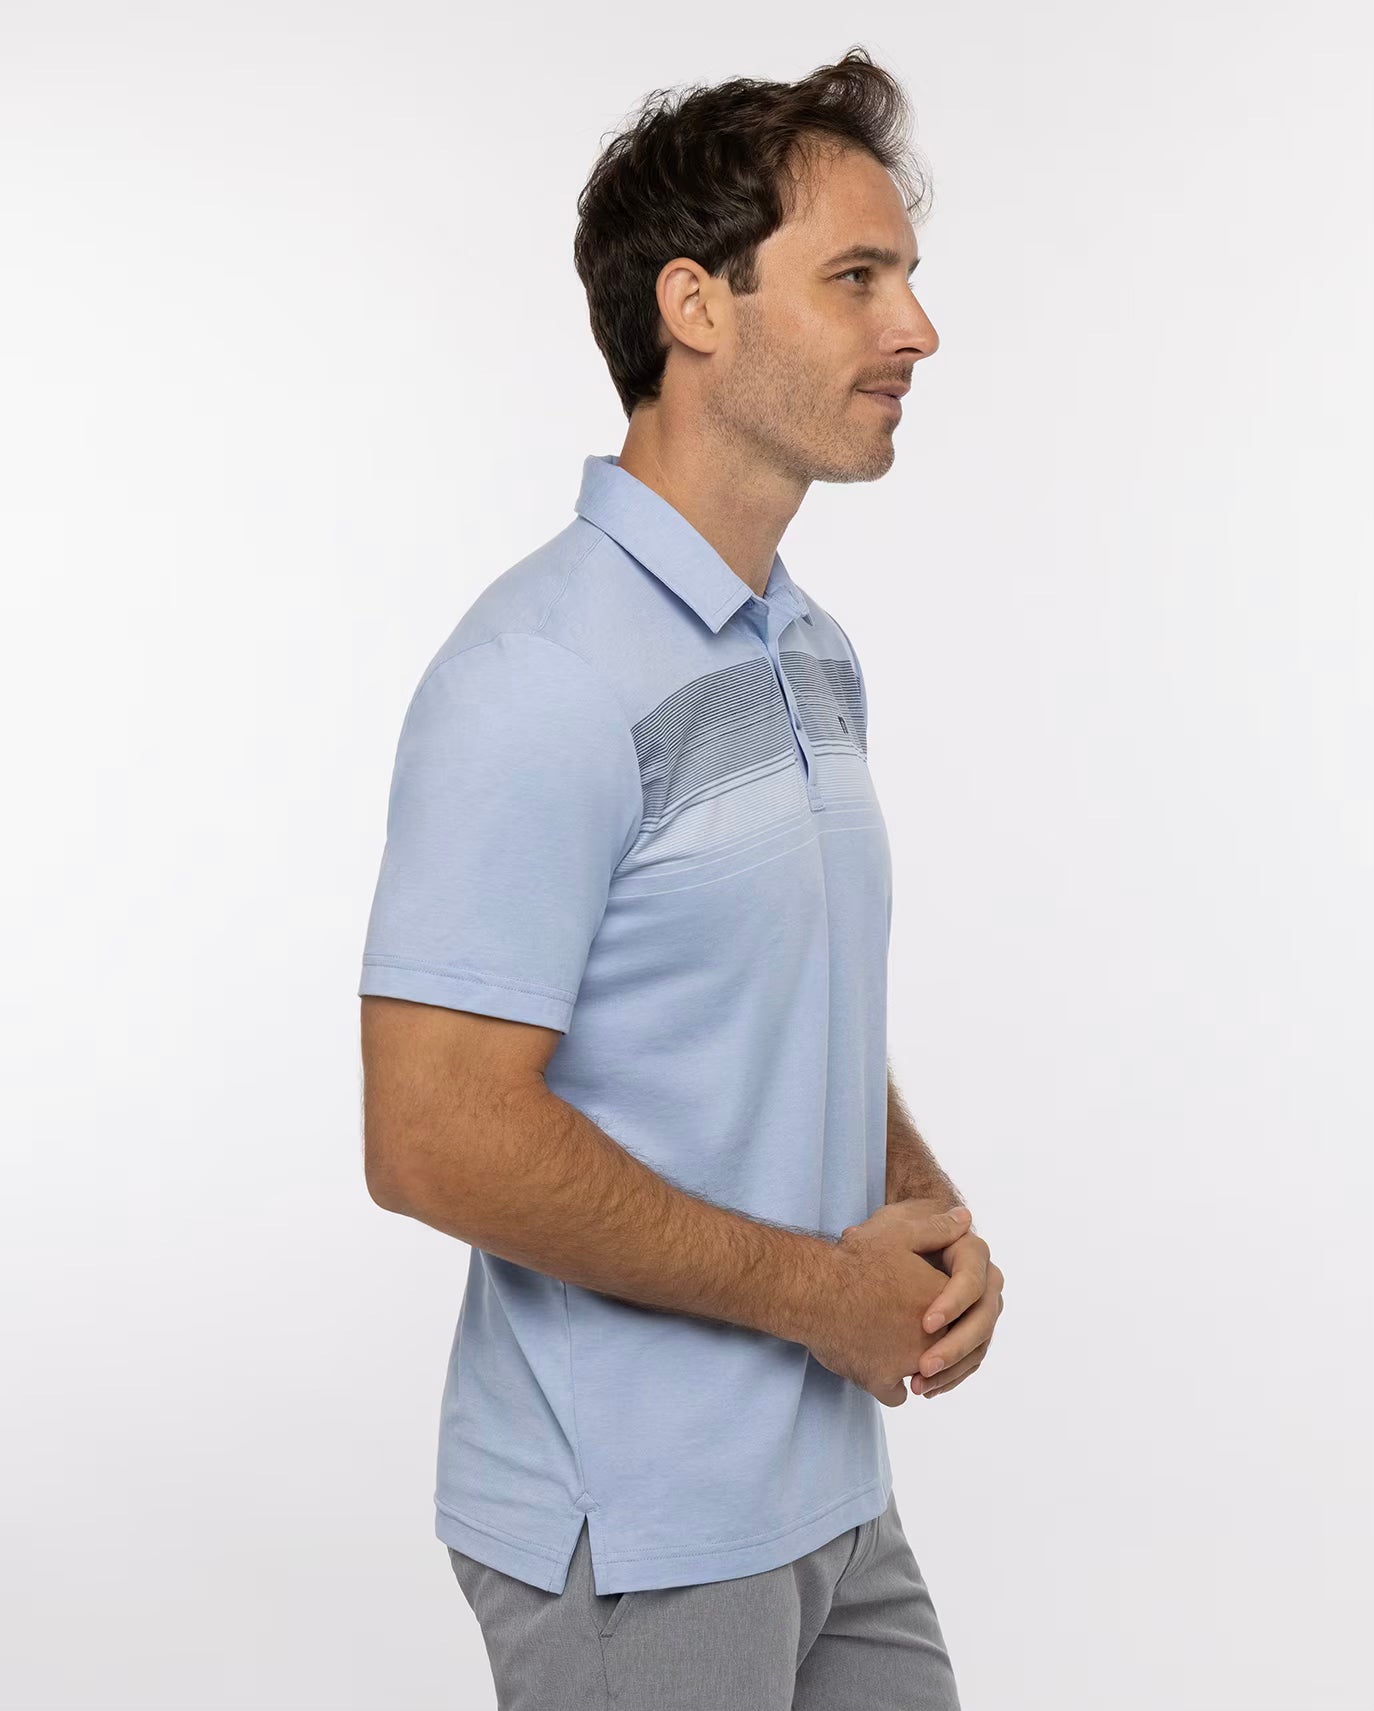 With a textured, gradient chest stripe, the GREEN CANOPY polo not only looks great, it feels great, too. 